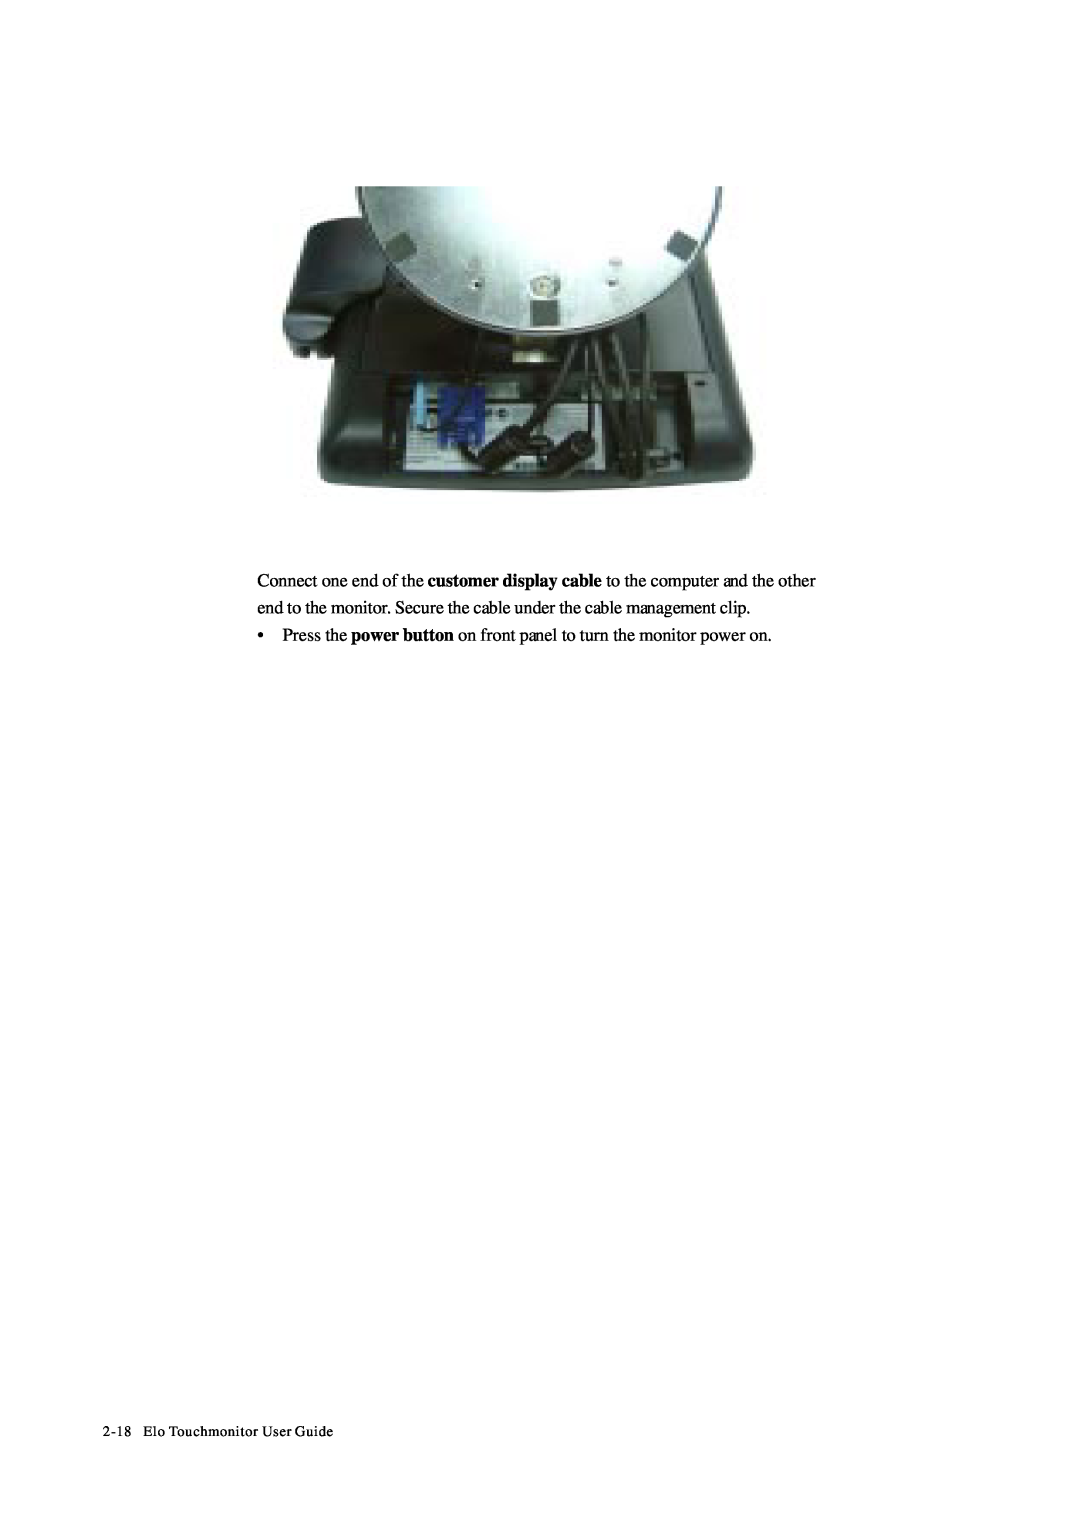 Tyco Electronics 1229L Press the power button on front panel to turn the monitor power on, Elo Touchmonitor User Guide 